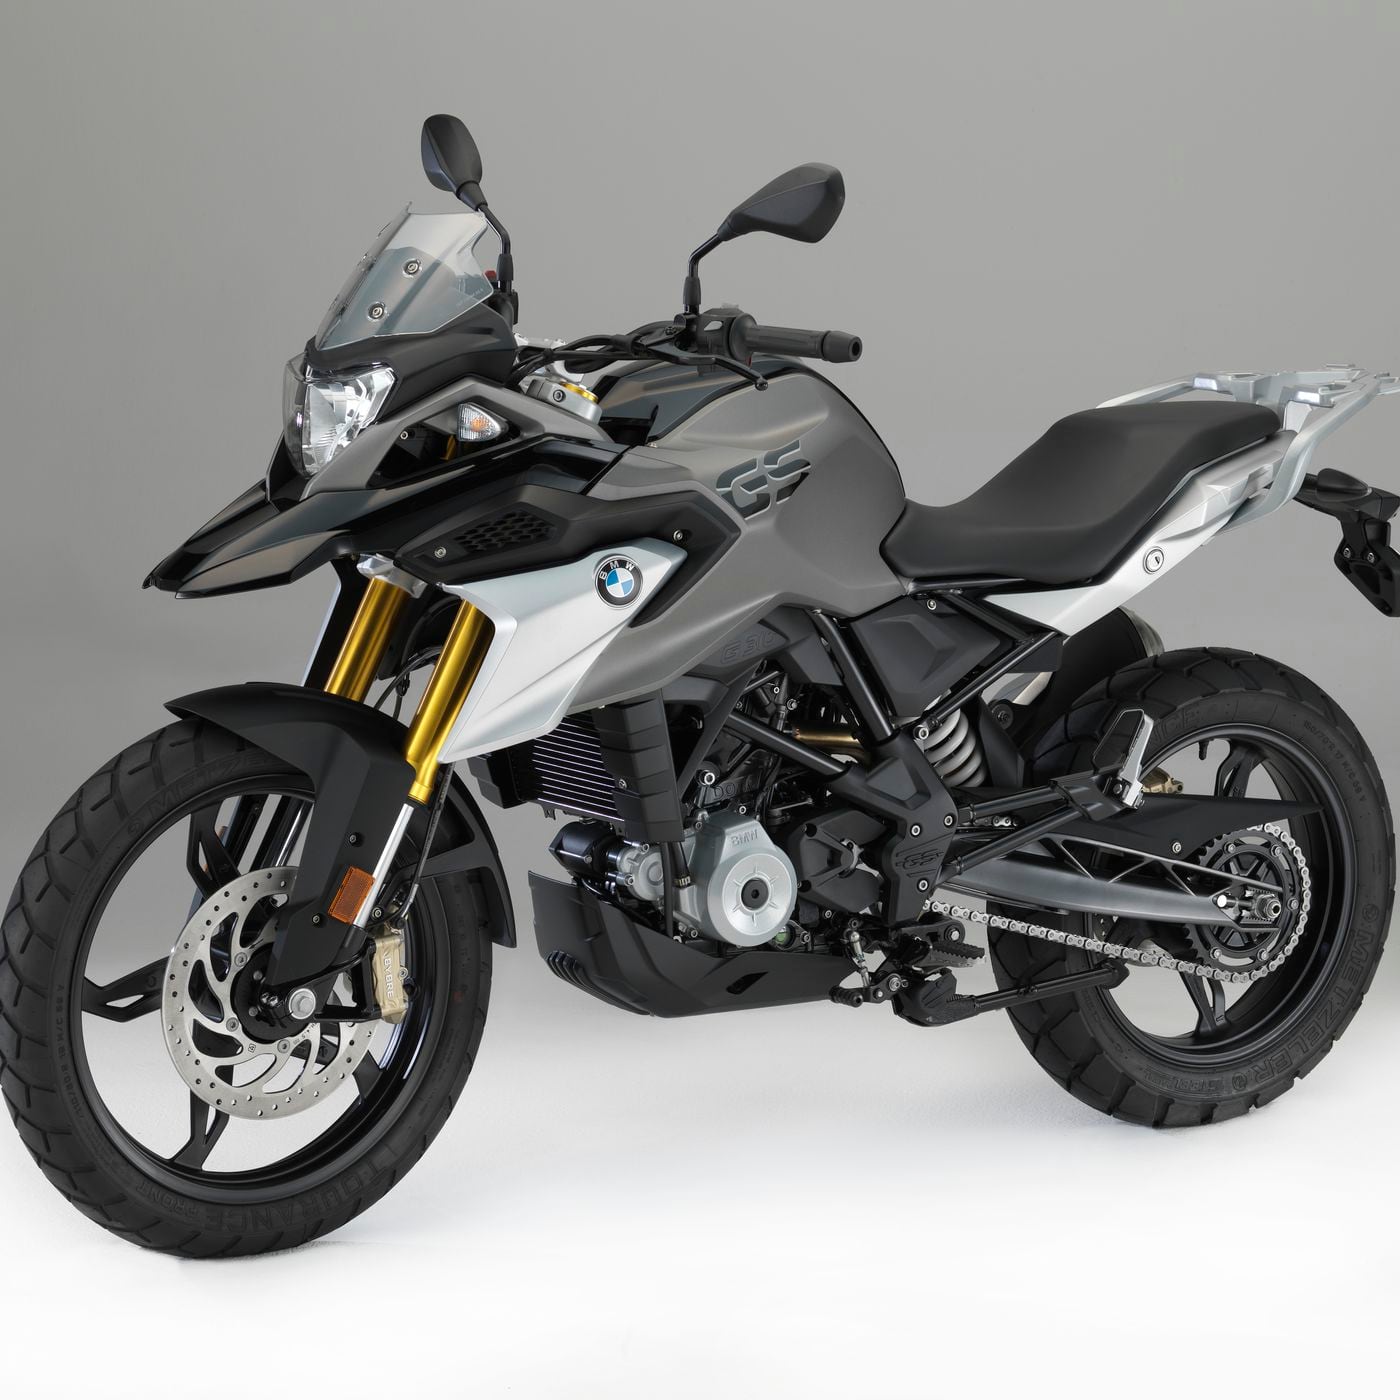 Bmw S New 17 G 310 Gs Is A Legitimate Contender For The Mini Adv Crown Cycle World